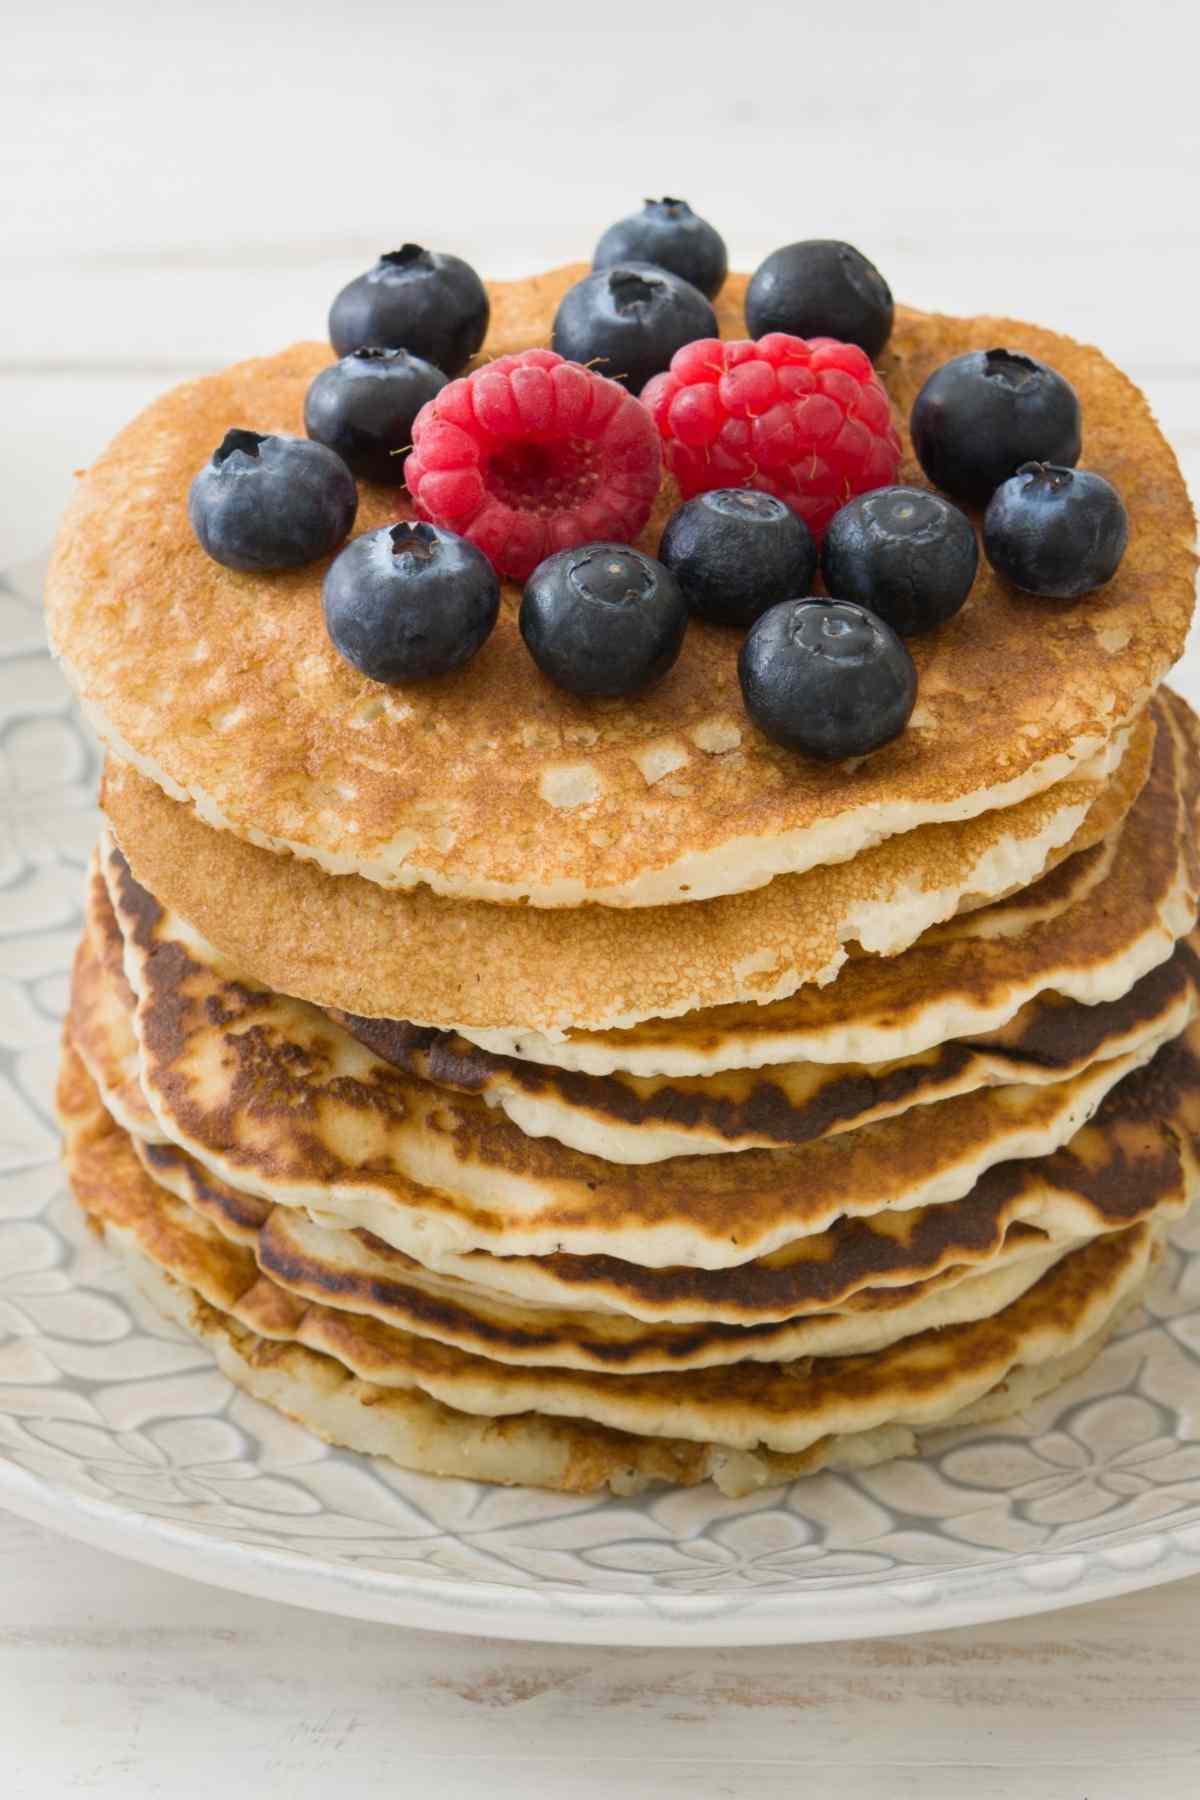 These Oatmeal Pancakes are light, fluffy, and have a touch of texture from the oats. They’re flavored with maple syrup, vanilla, and cinnamon and have a slightly tangy flavor.